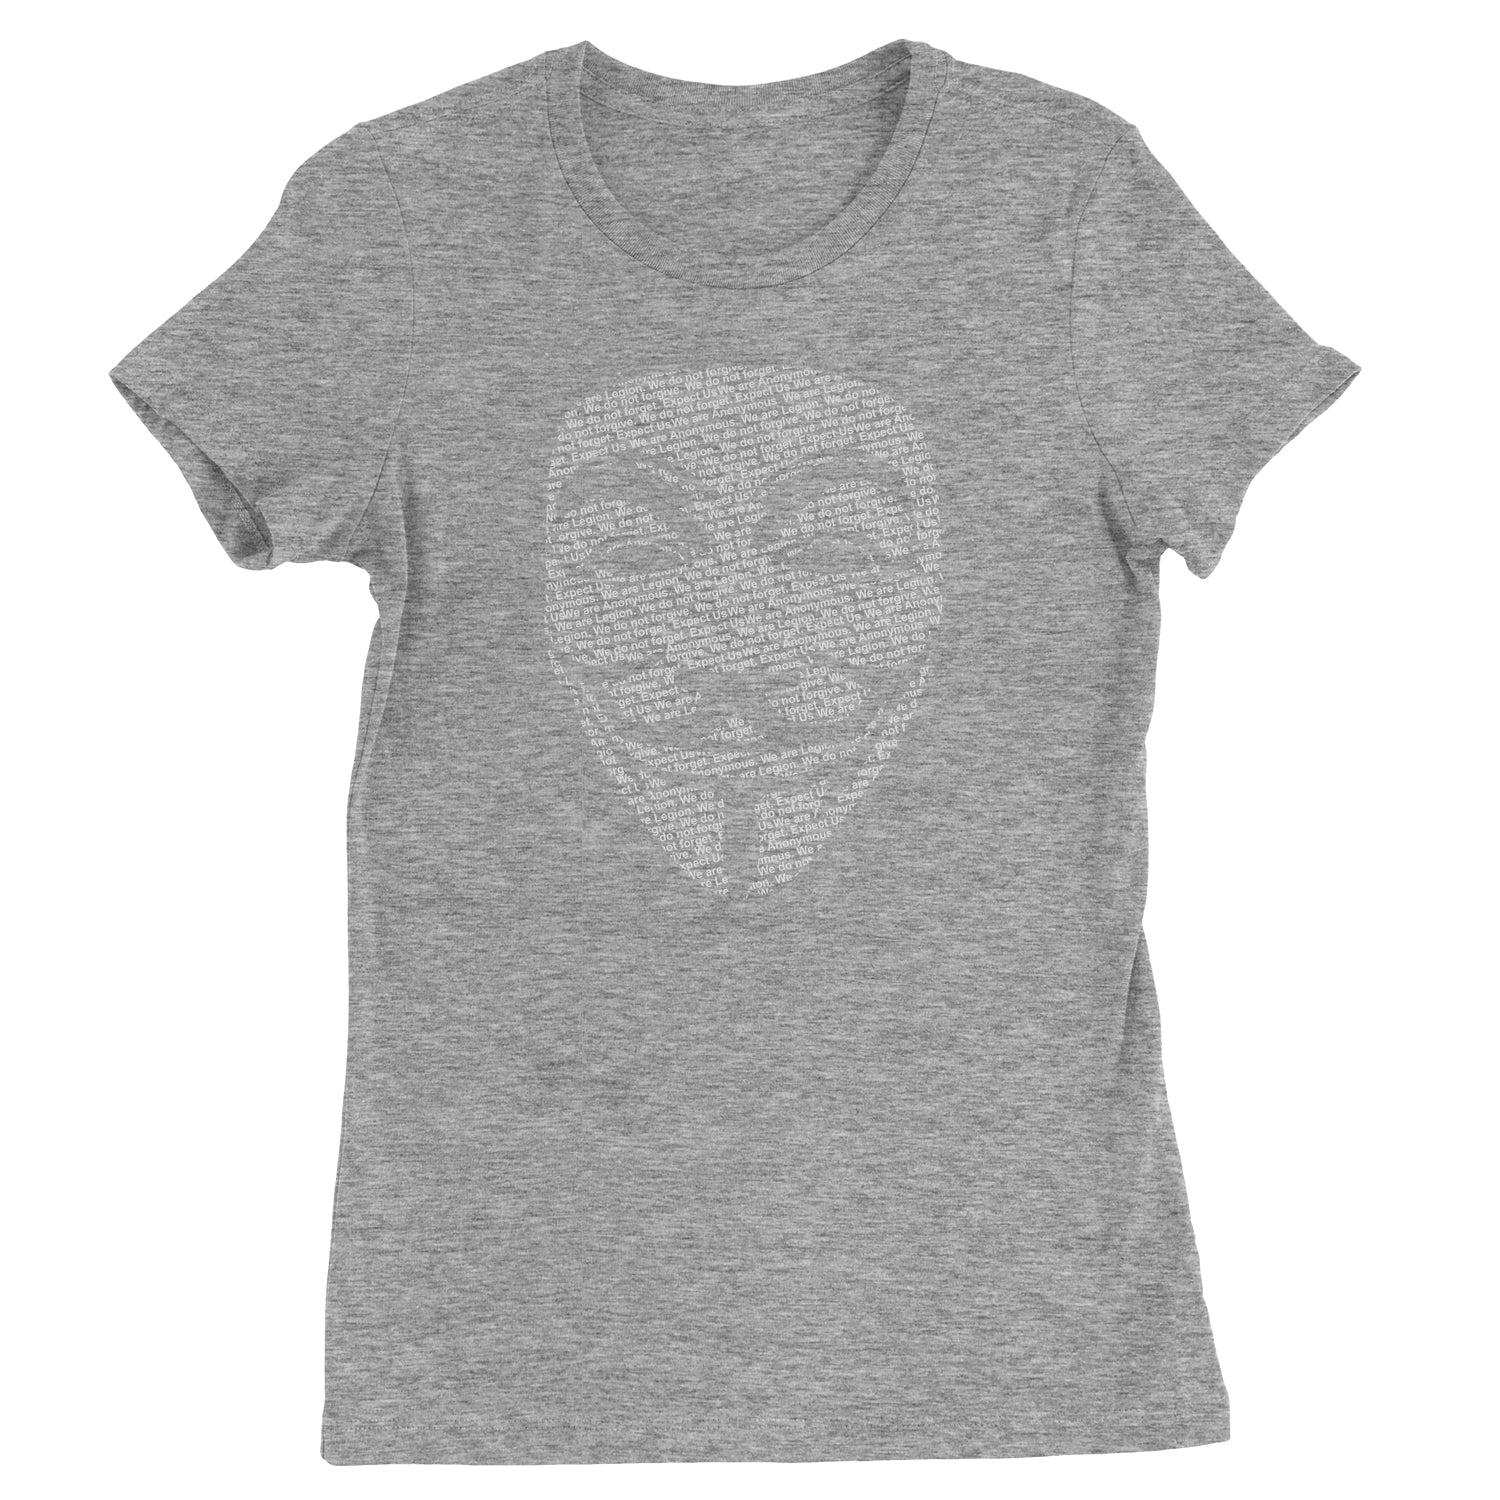 V For Vendetta Anonymous Mask Womens T-shirt #expressiontees by Expression Tees